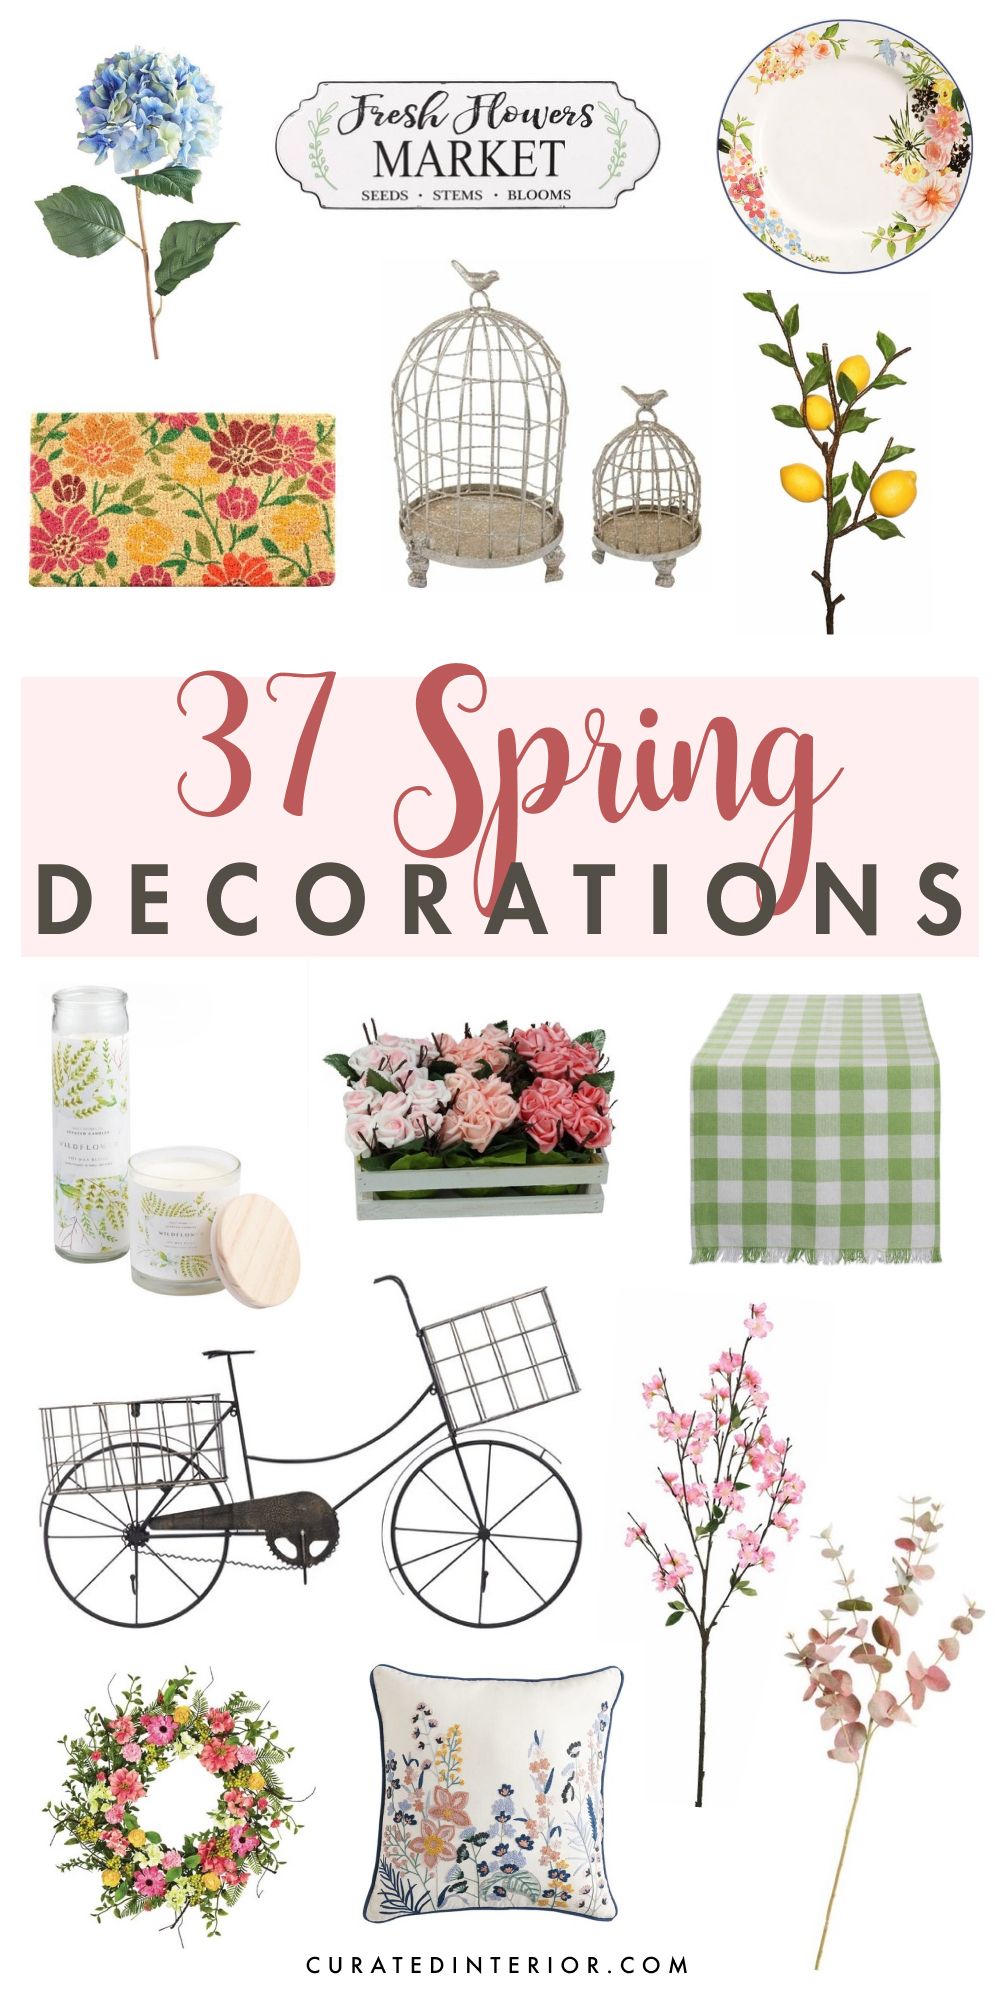 37 Affordable Spring Decorations and Accents for the Home